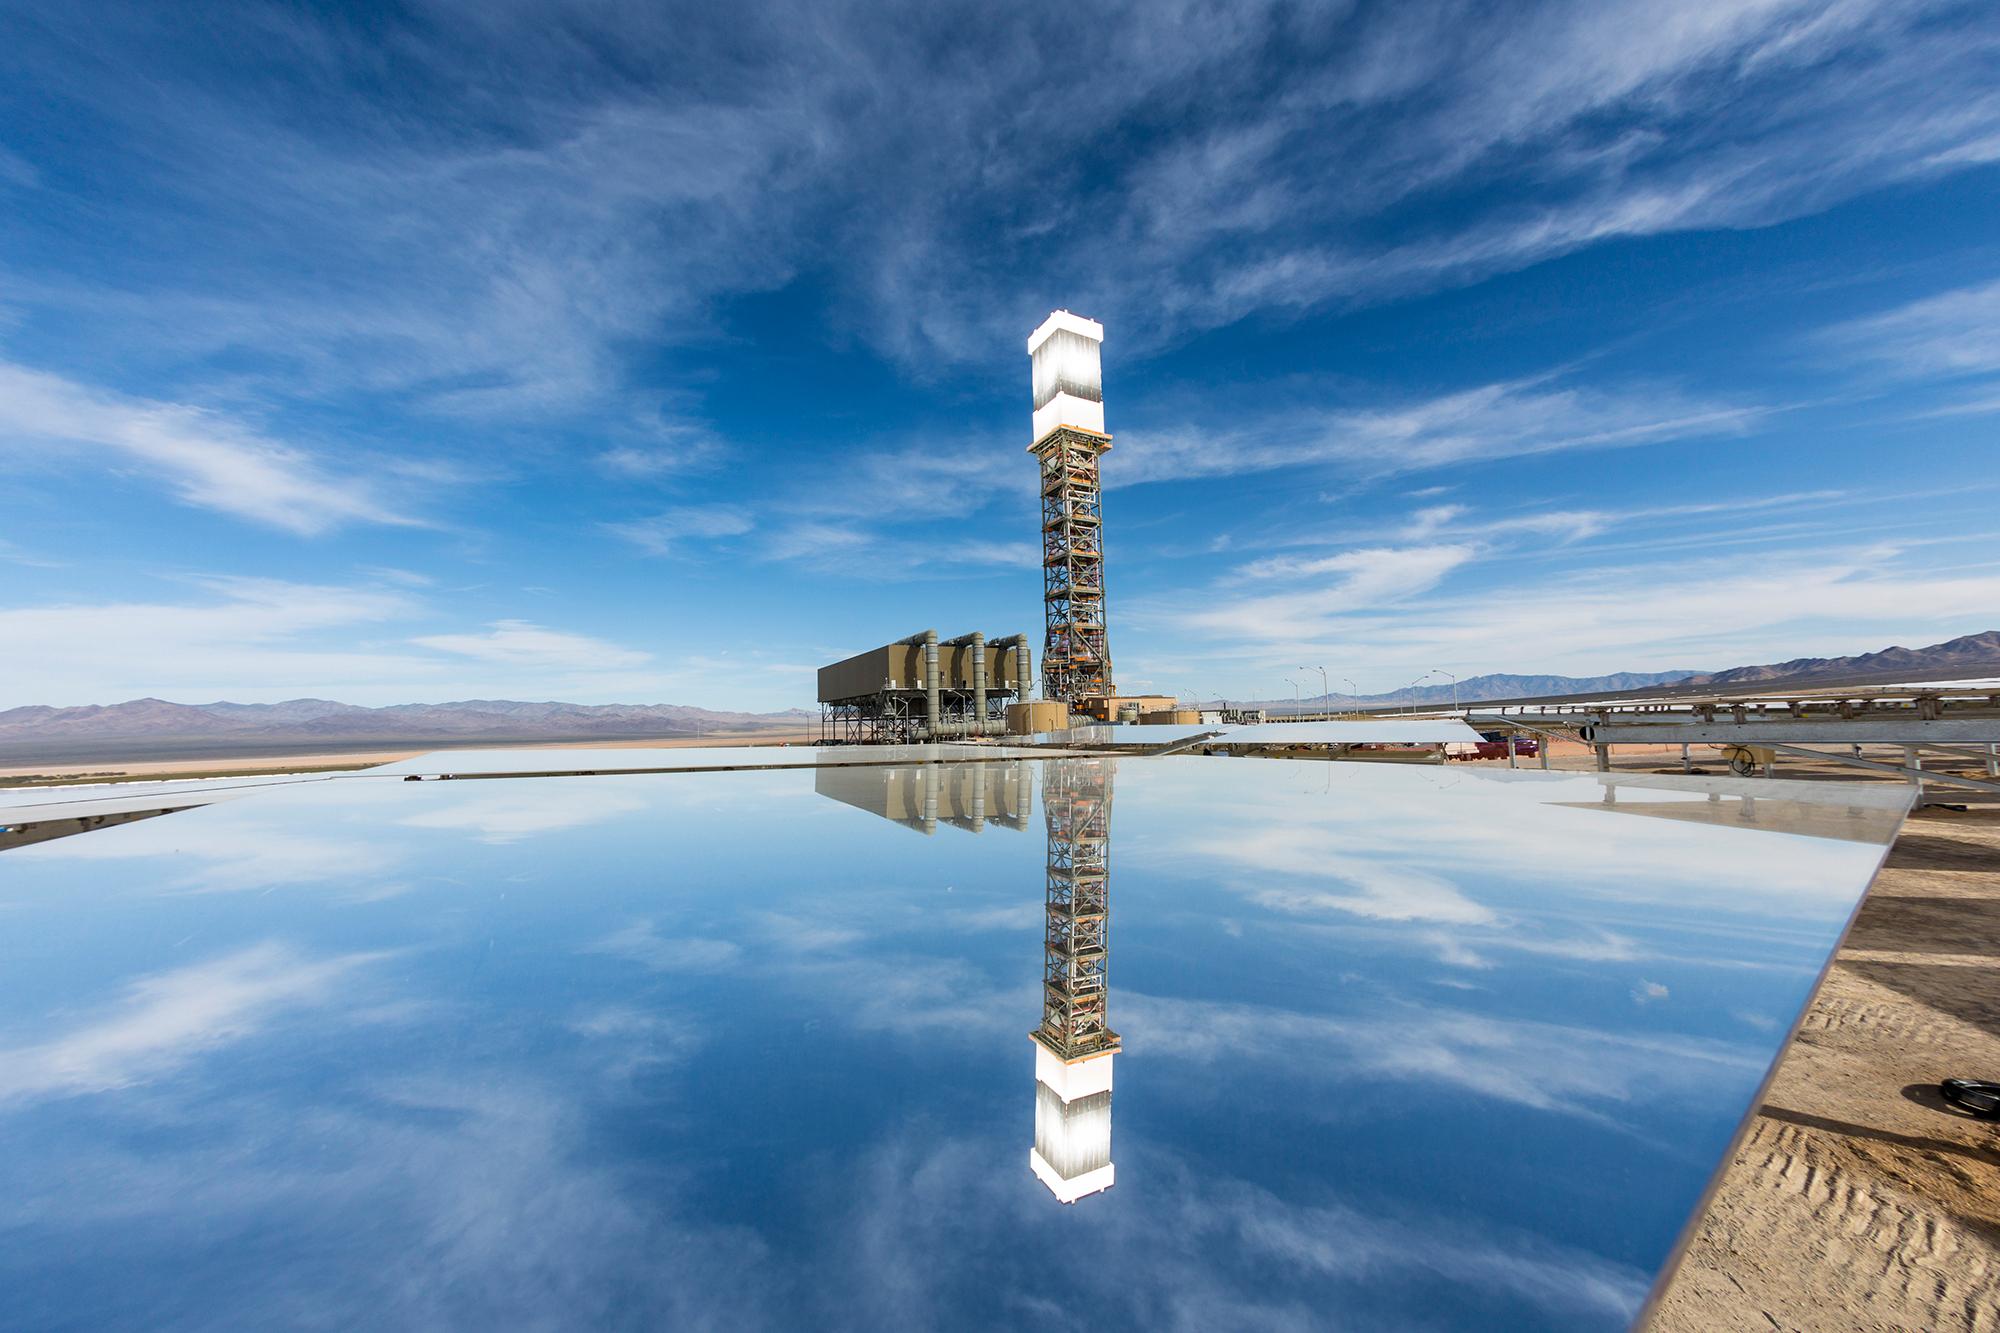  largest solar thermal power plant now live - Summerlin Energy Arizona